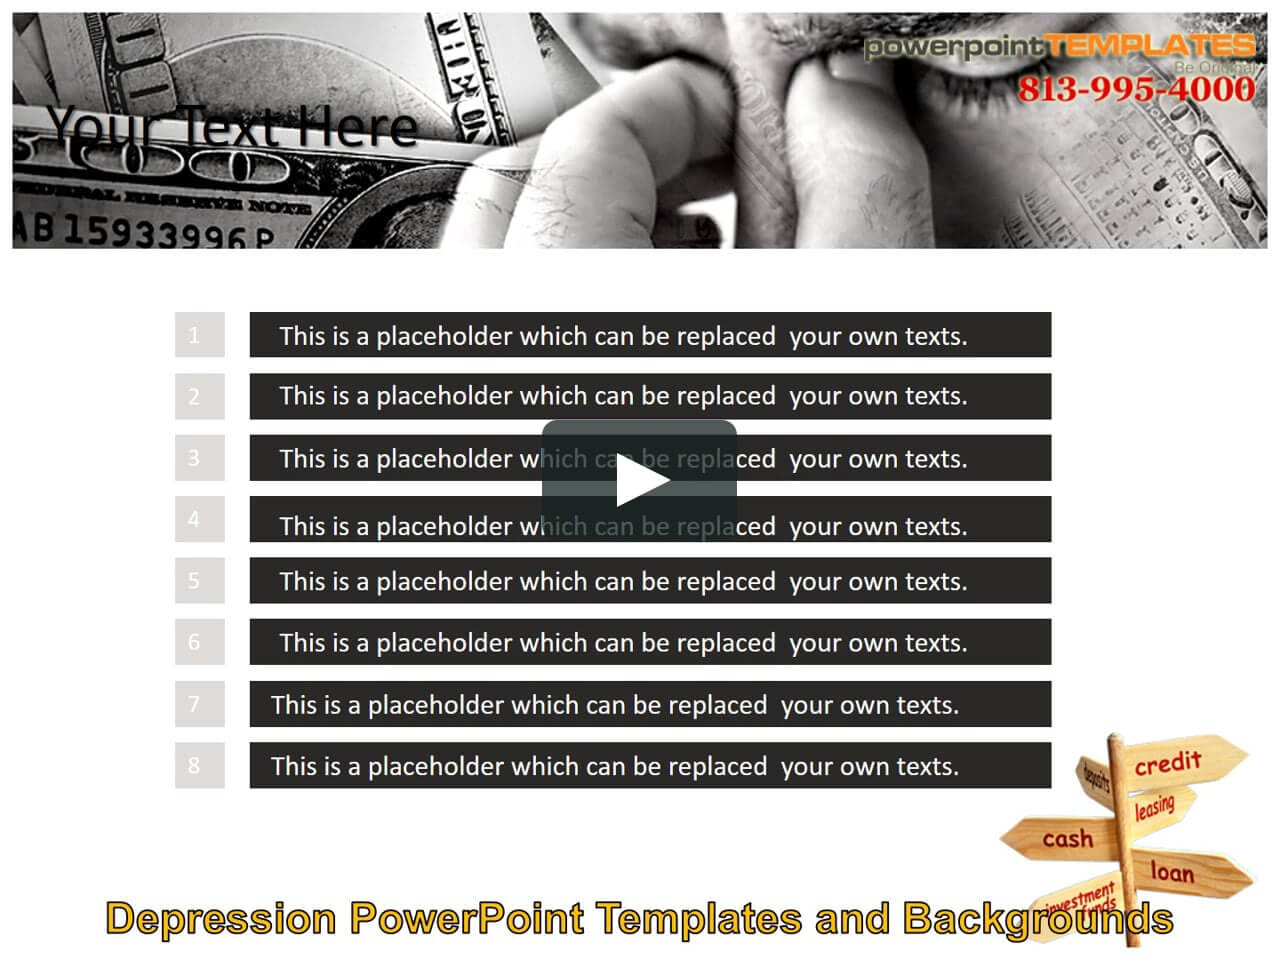 Depression Powerpoint Templates And Backgrounds On Vimeo Within Depression Powerpoint Template